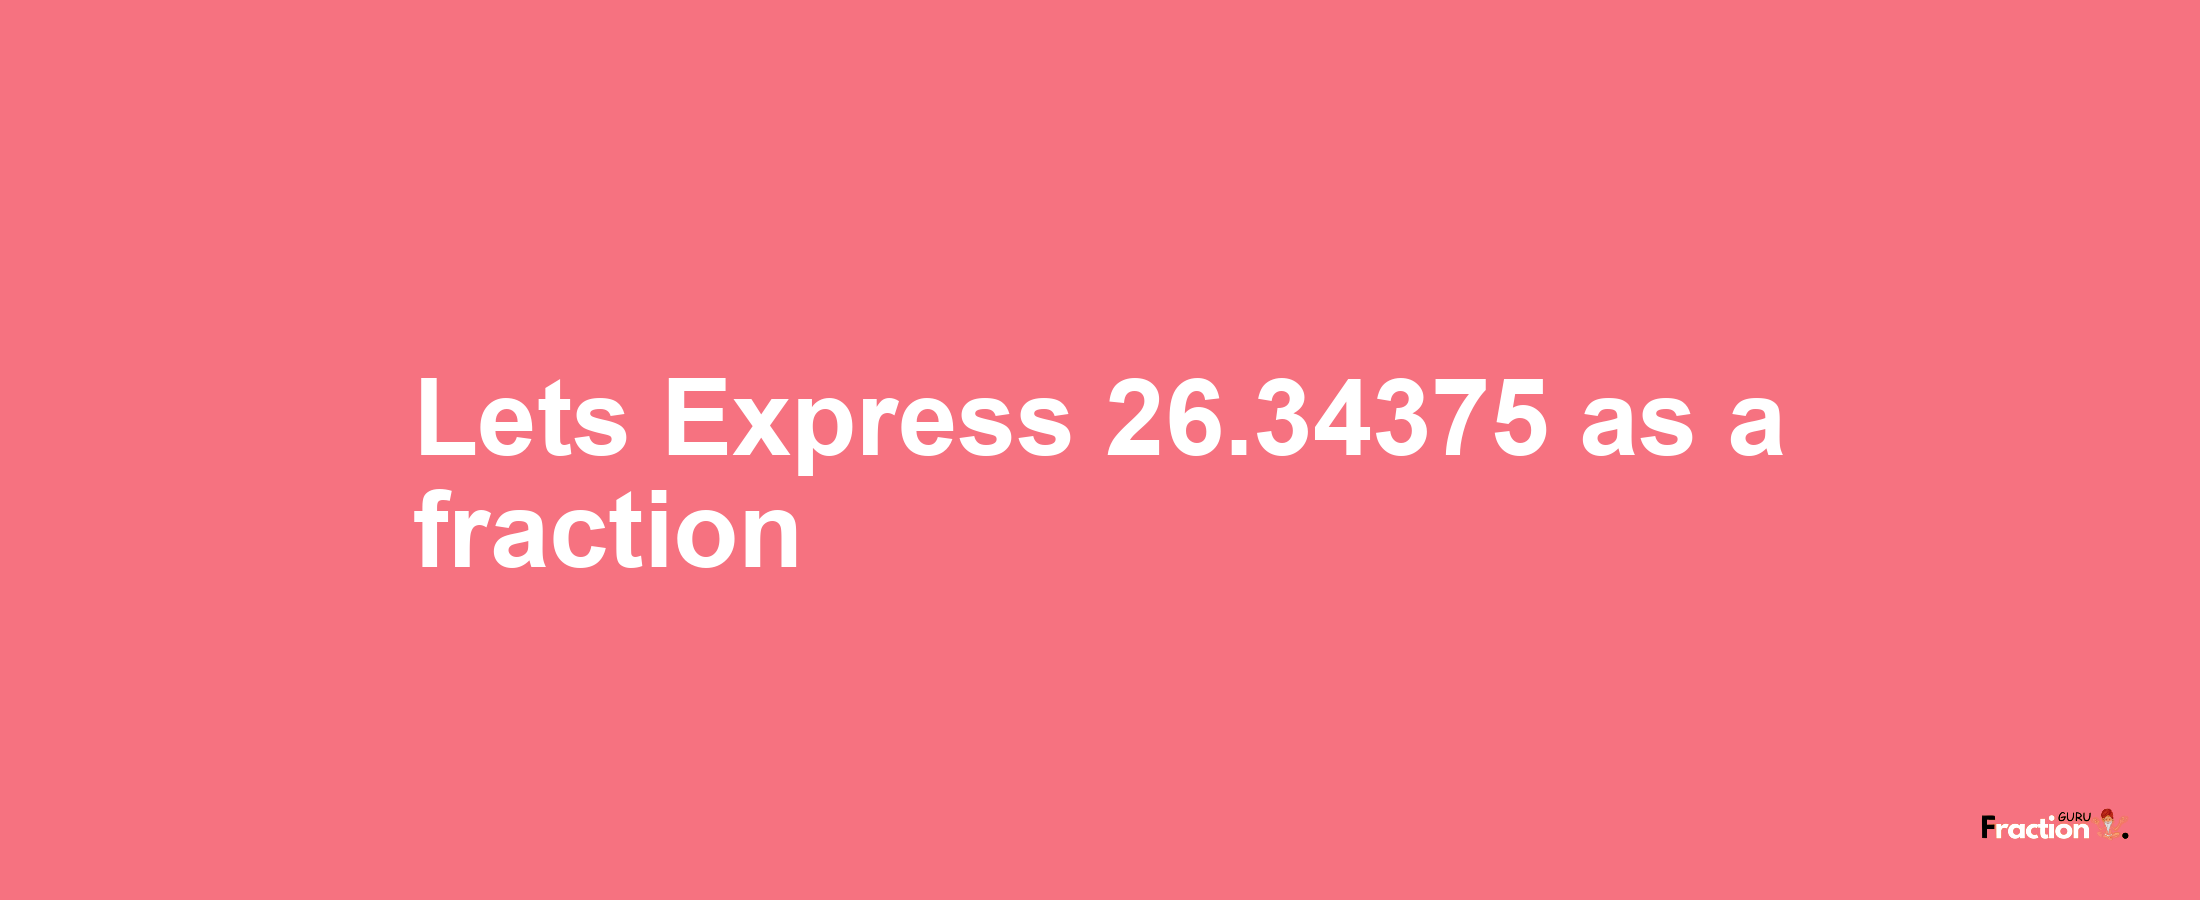 Lets Express 26.34375 as afraction